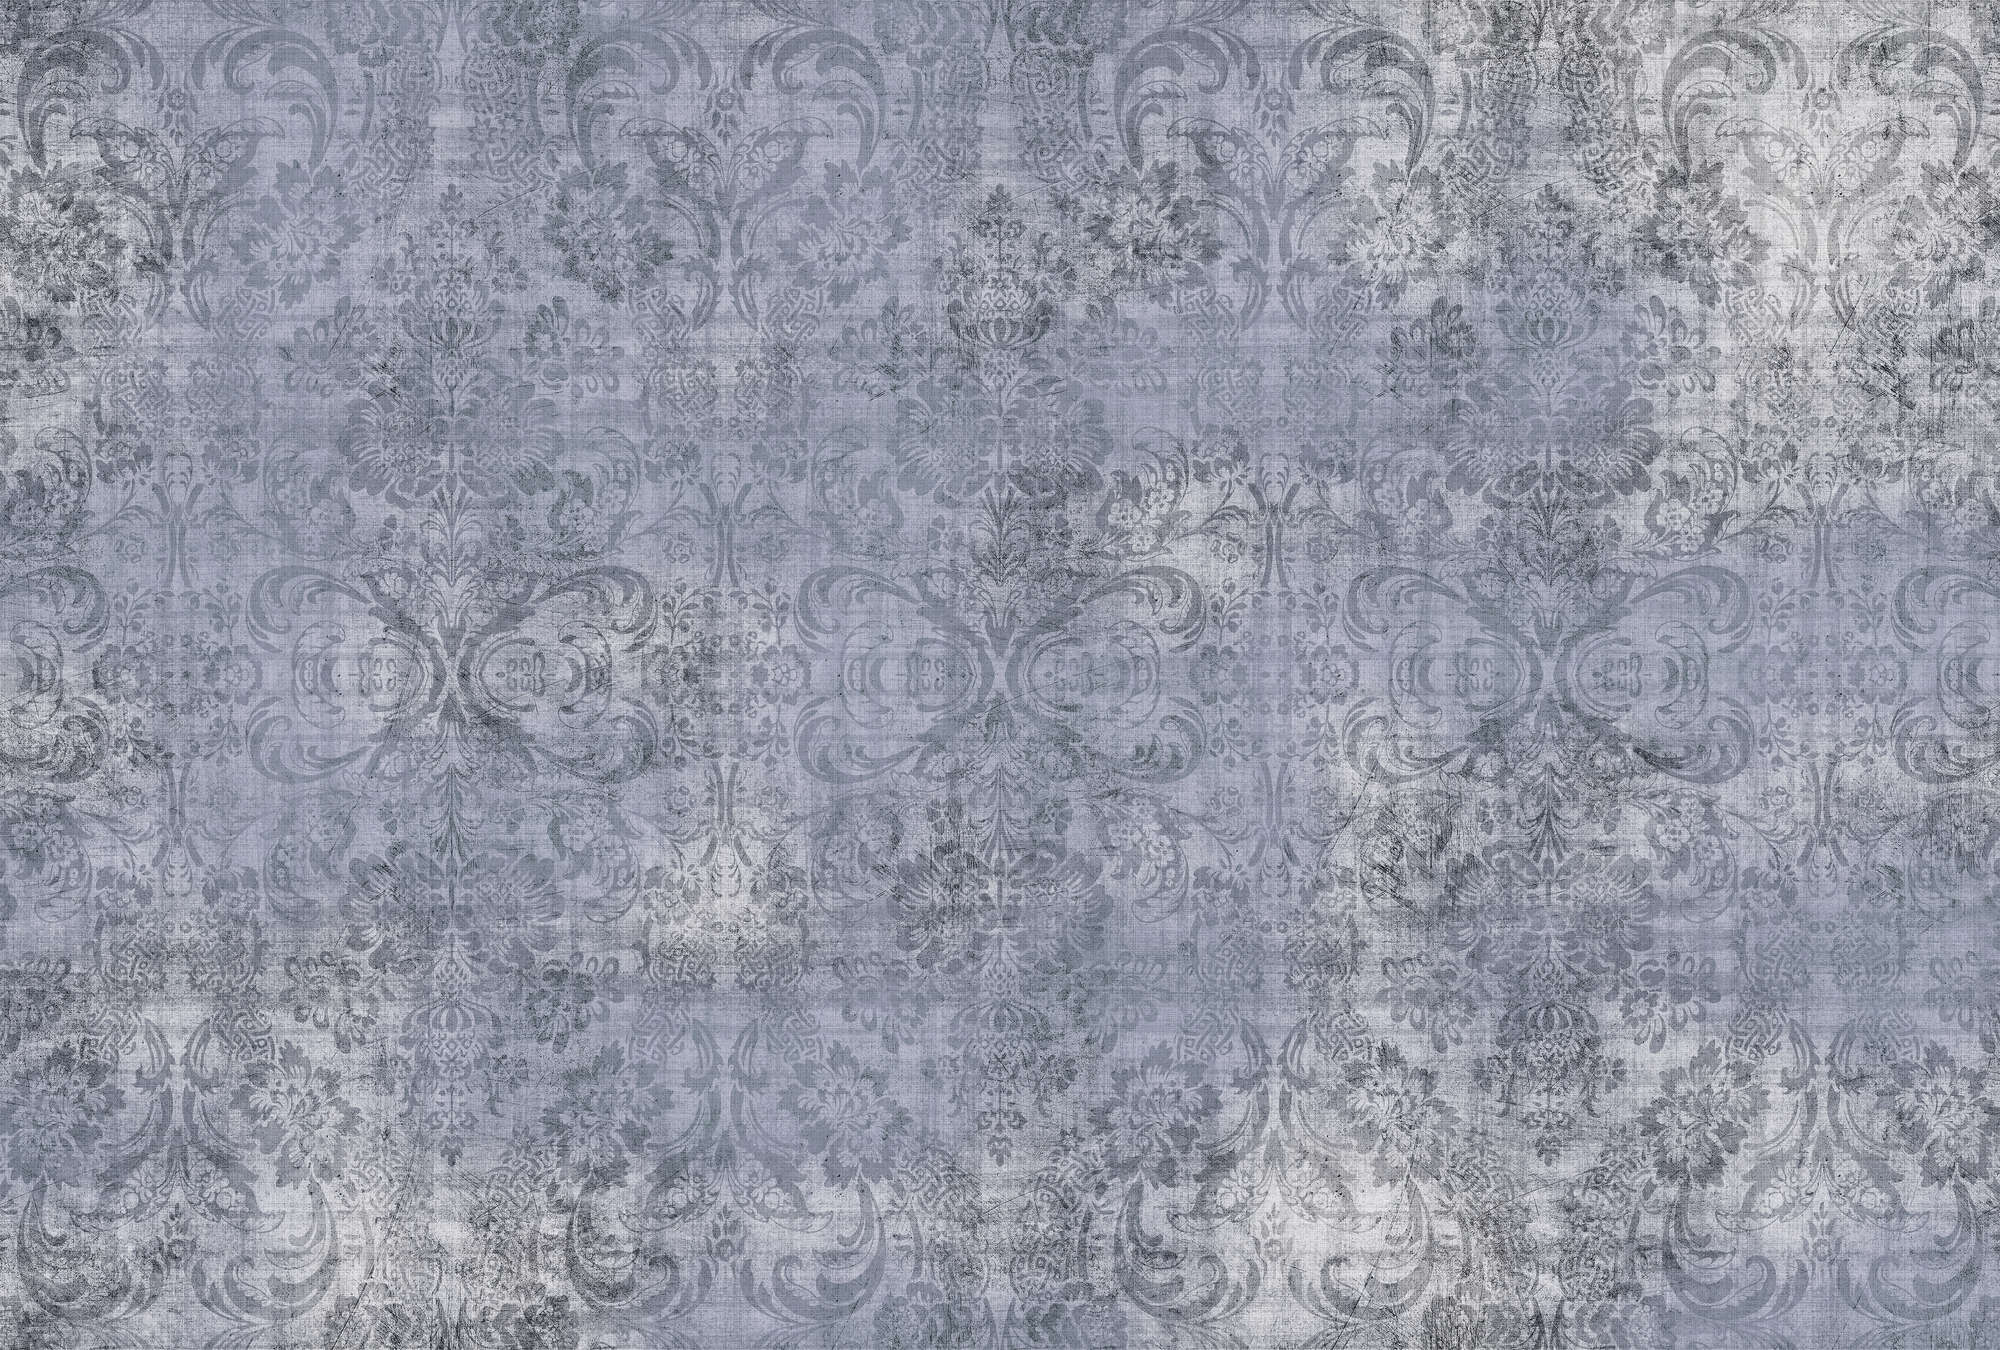             Old damask 3 - natural linen structure blue mottled ornaments wallpaper - Blue | Structure non-woven
        